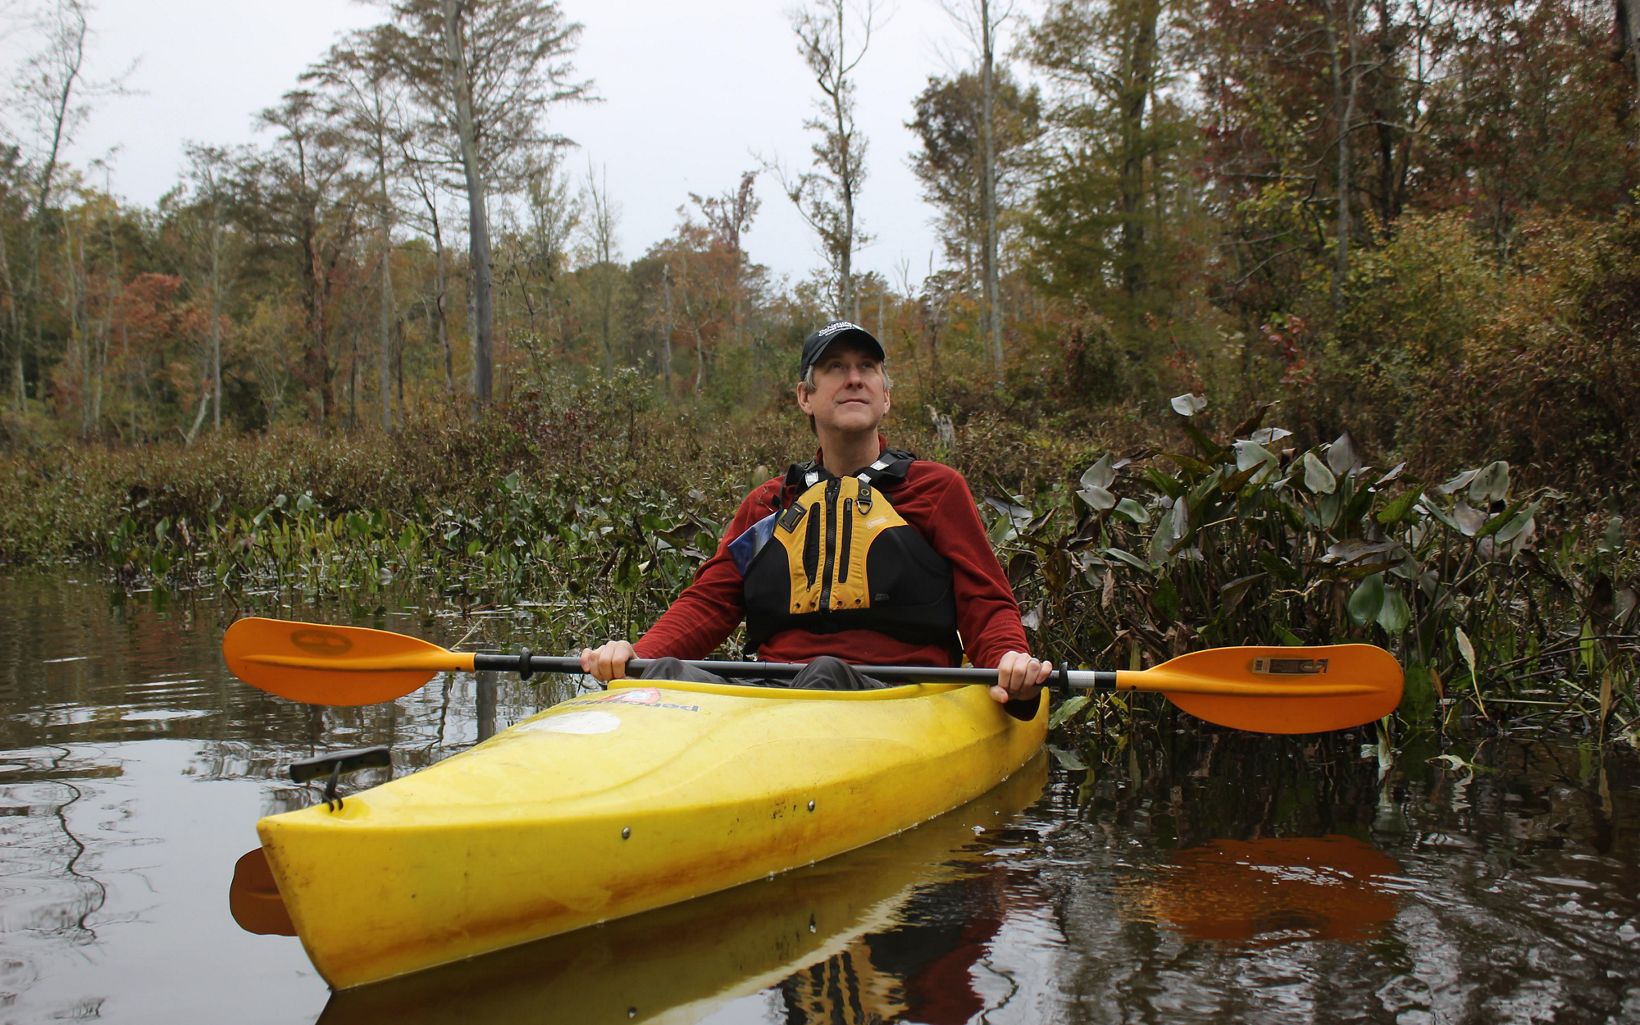 Danny White takes a moment to enjoy the beauty of Dragon Run during a fall paddle with Friends of Dragon Run.